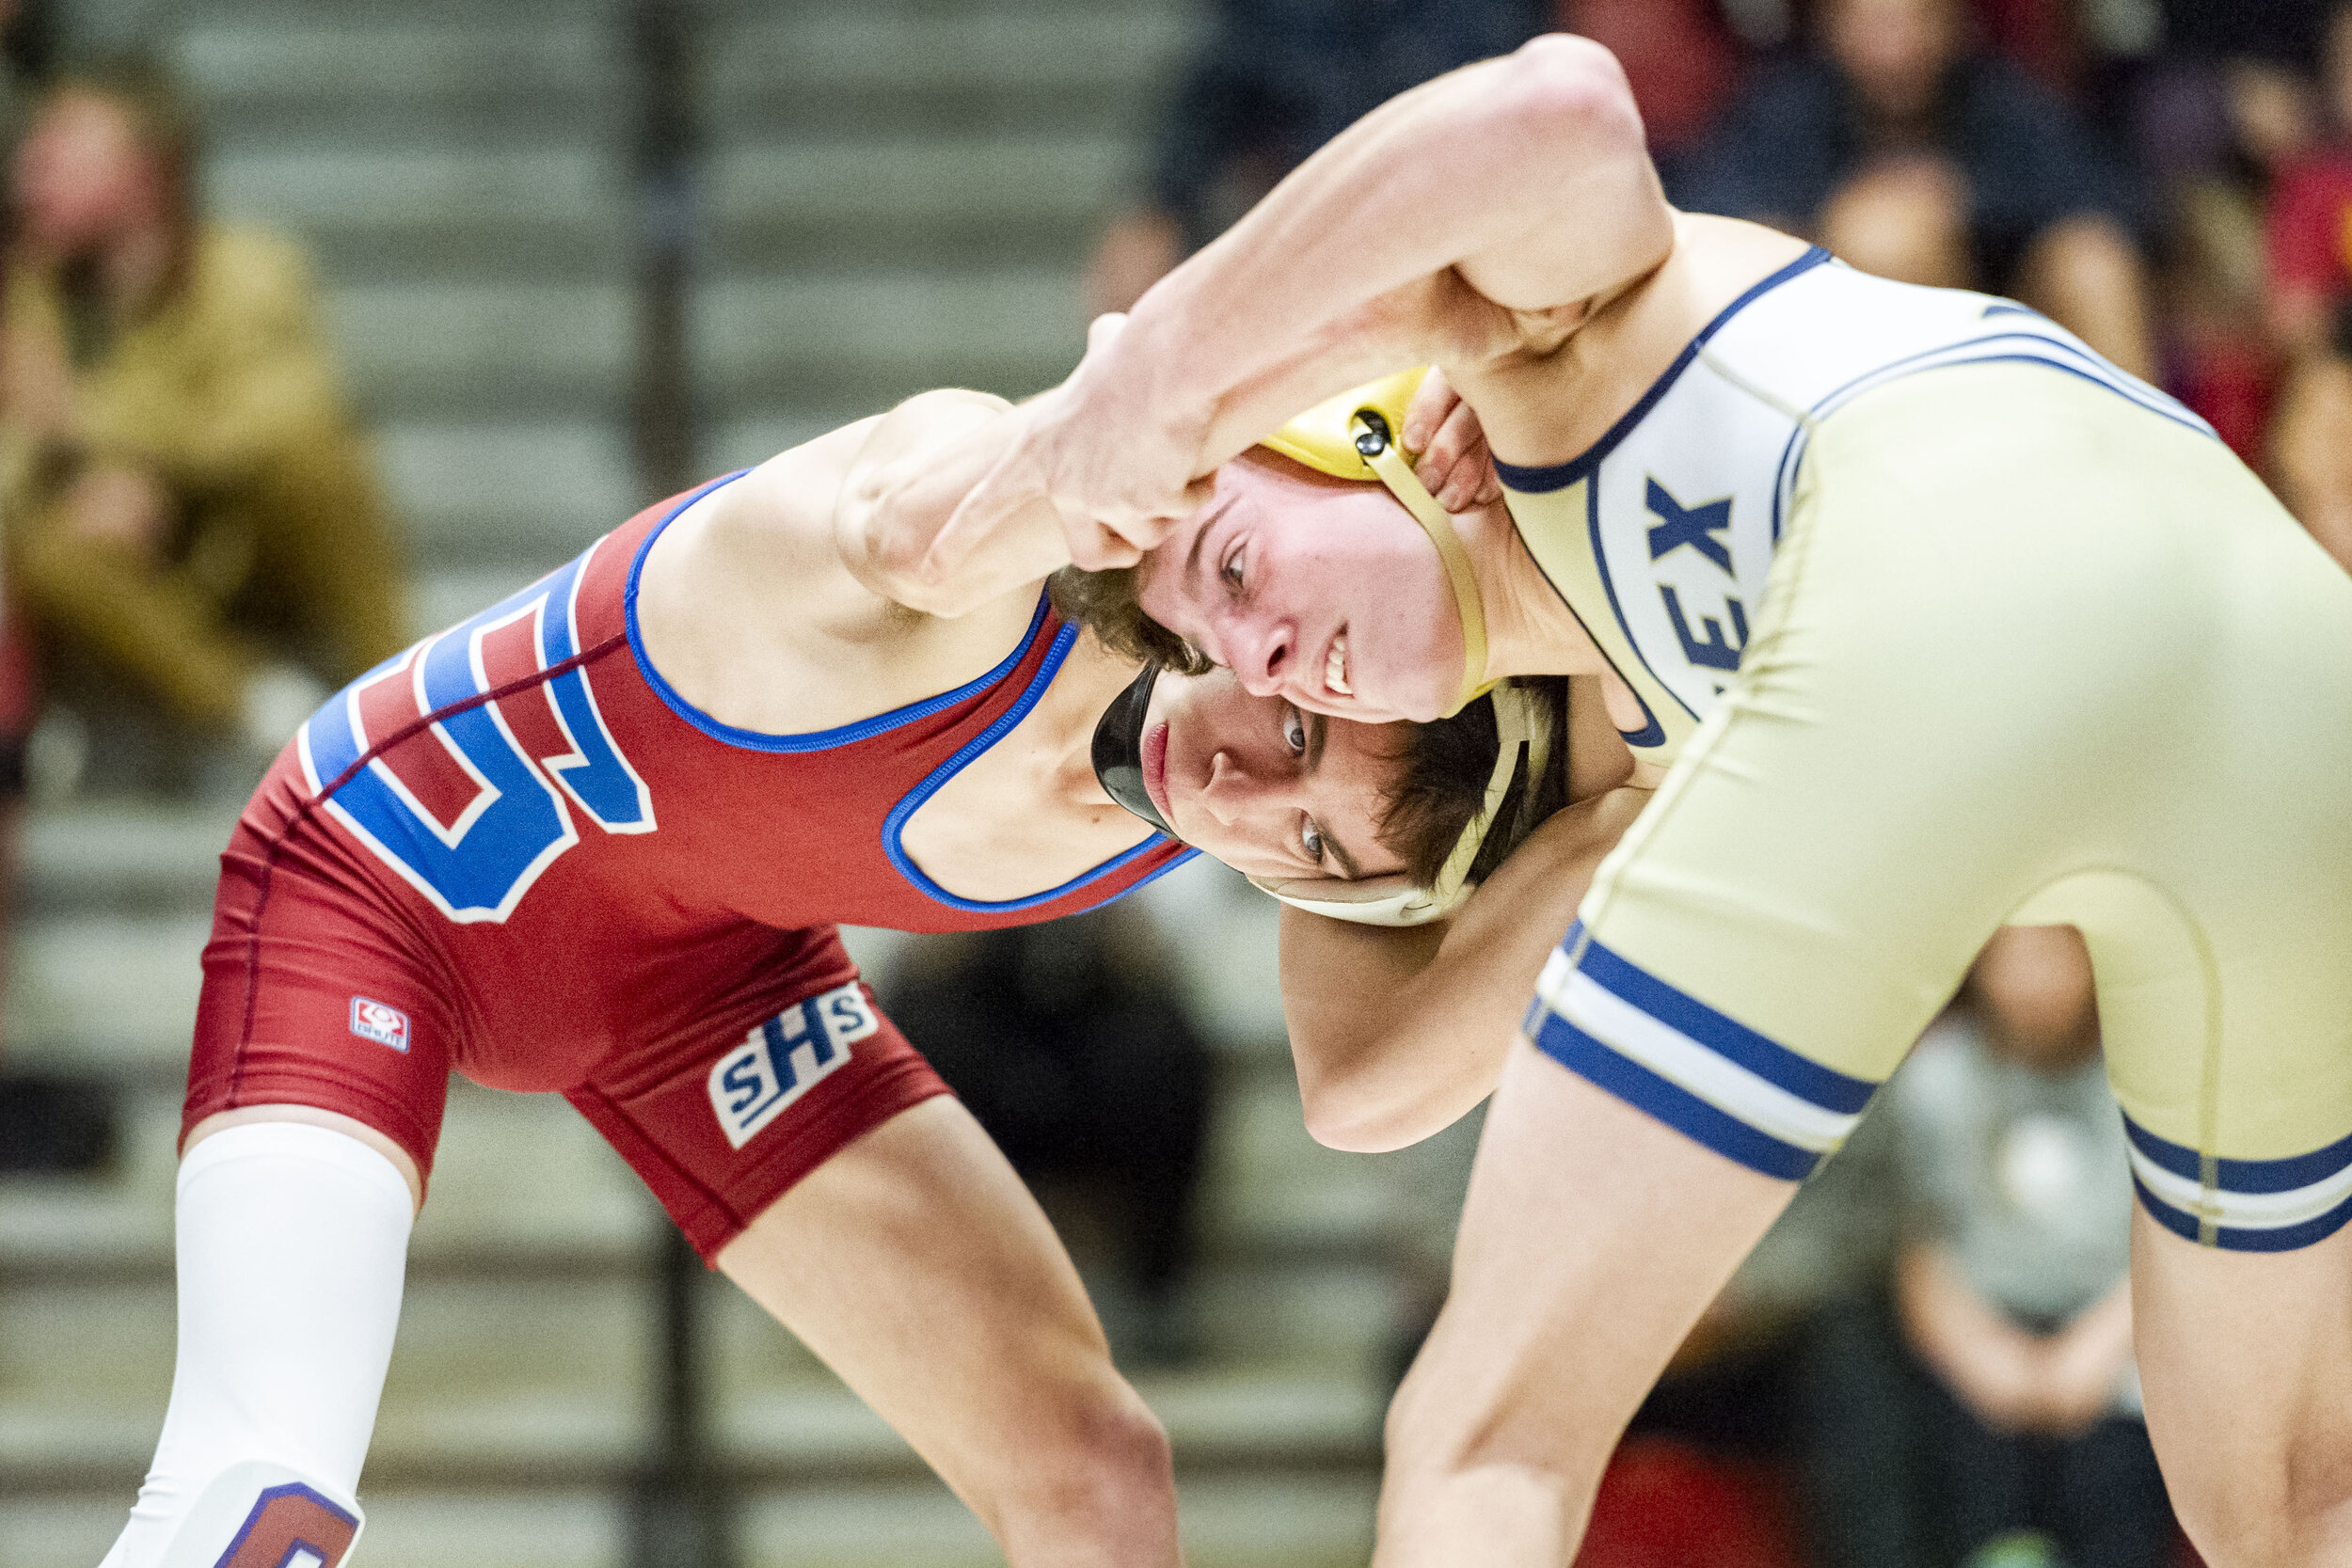  Spaulding High School senior Carter Dickinson, left, squares off with Christian Stygles of Essex, right, during a wrestling meet in Barre, VT on Tuesday, January 28th 2020. 